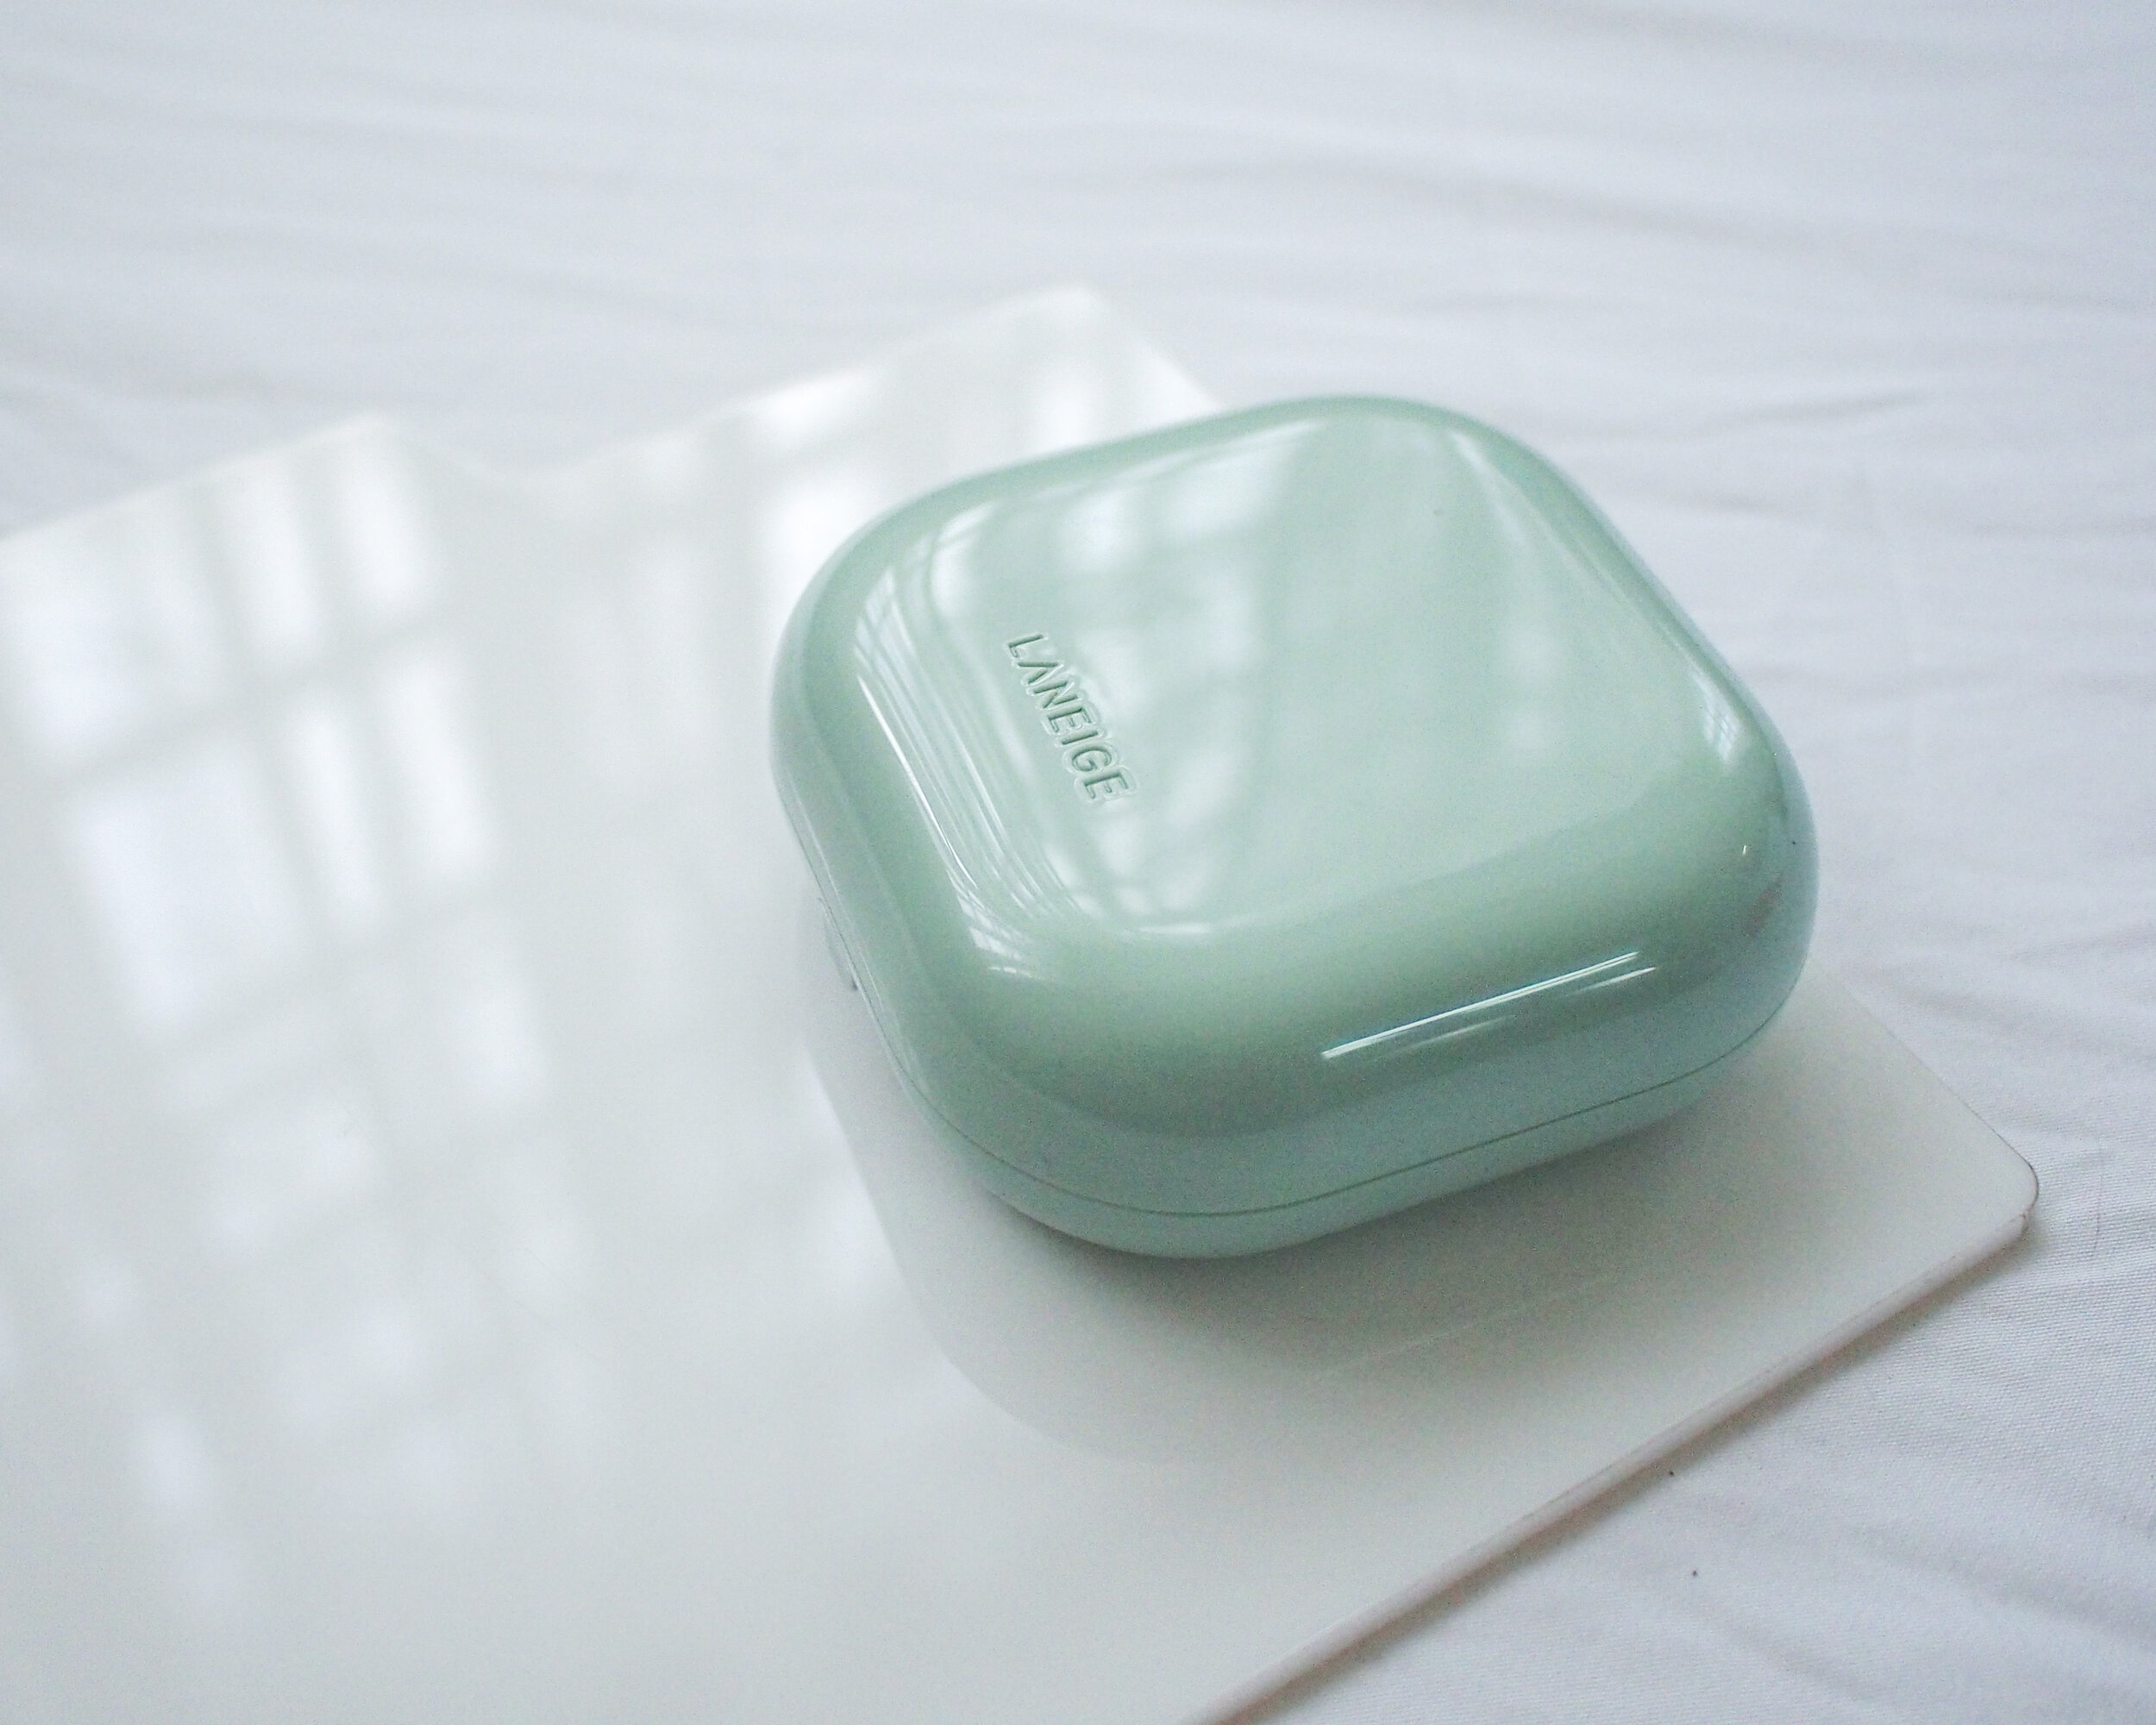 Is the Laneige Neo Cushion Matte really mask-proof? — Project Vanity